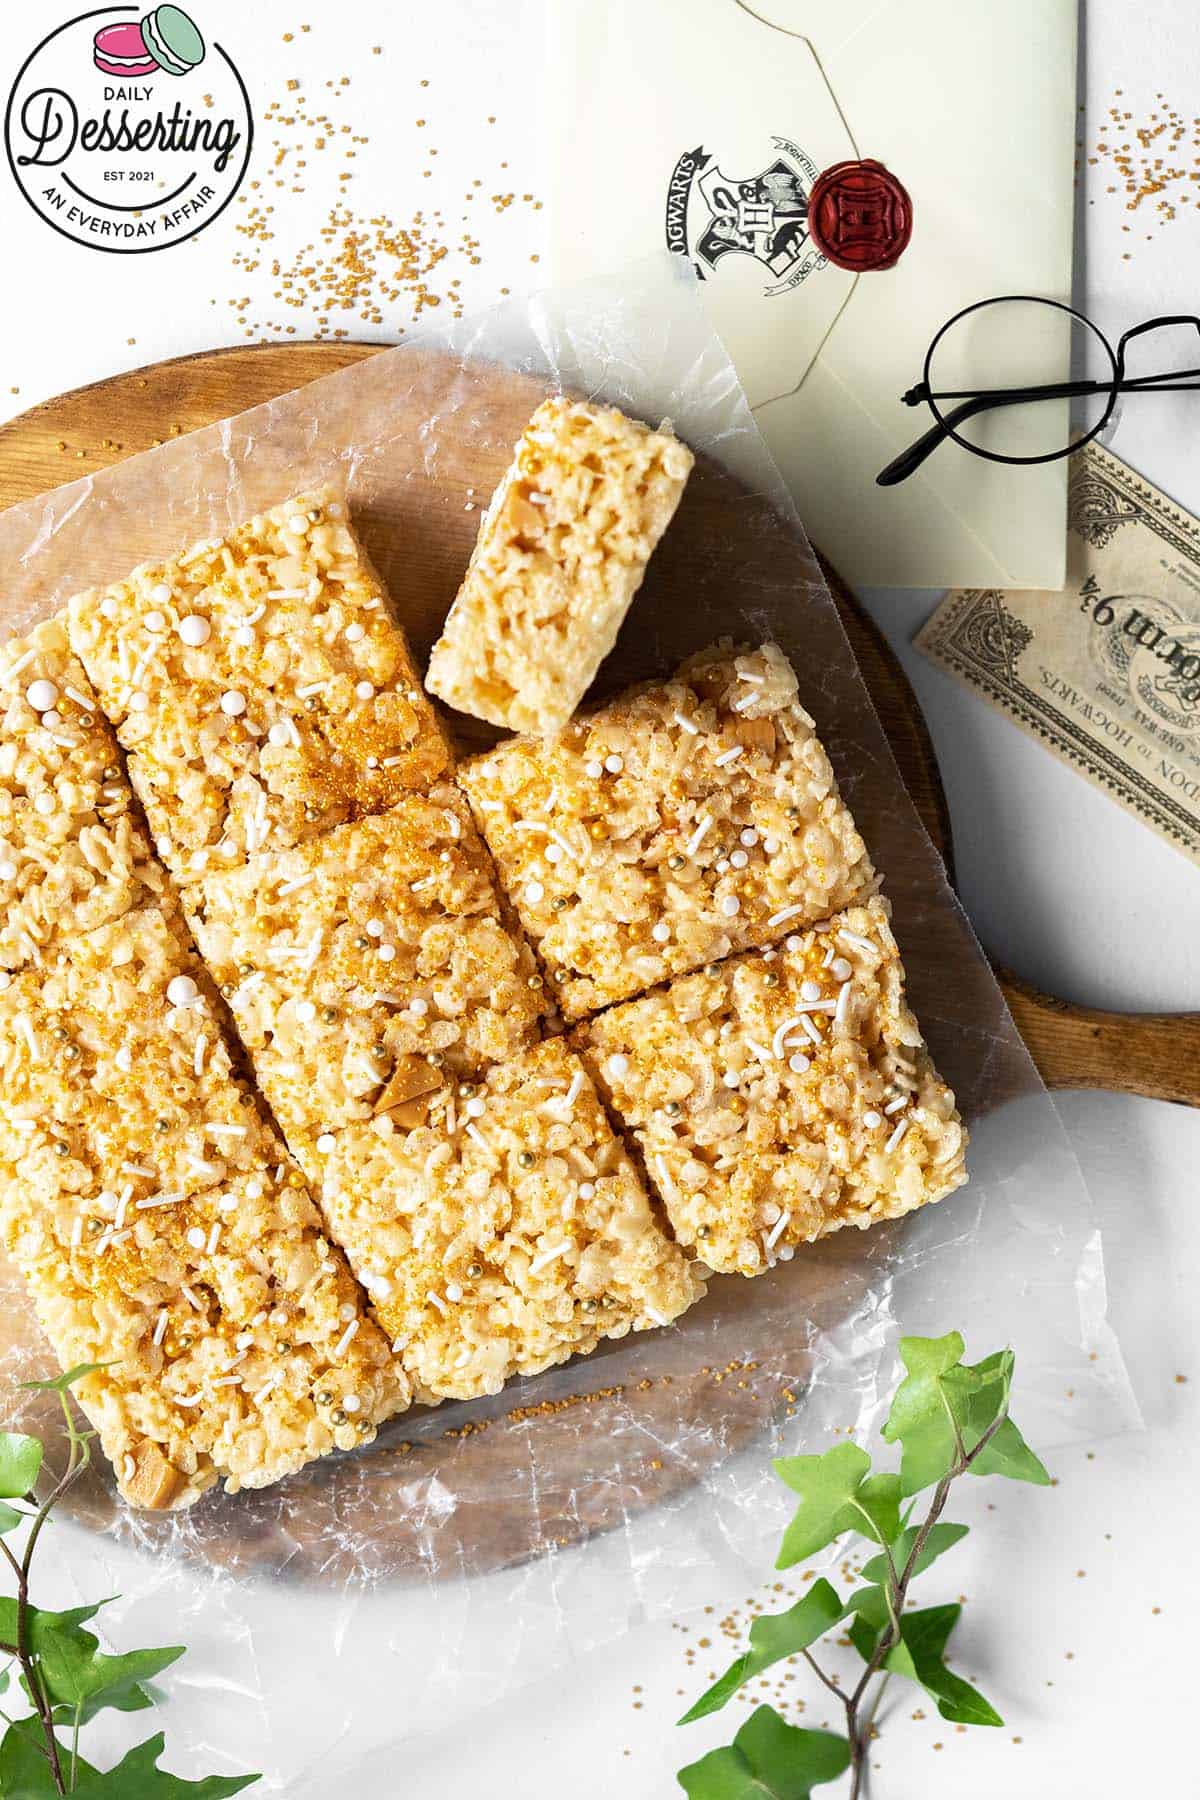 butterscotch rice krispies treats recipe with harry potter styling